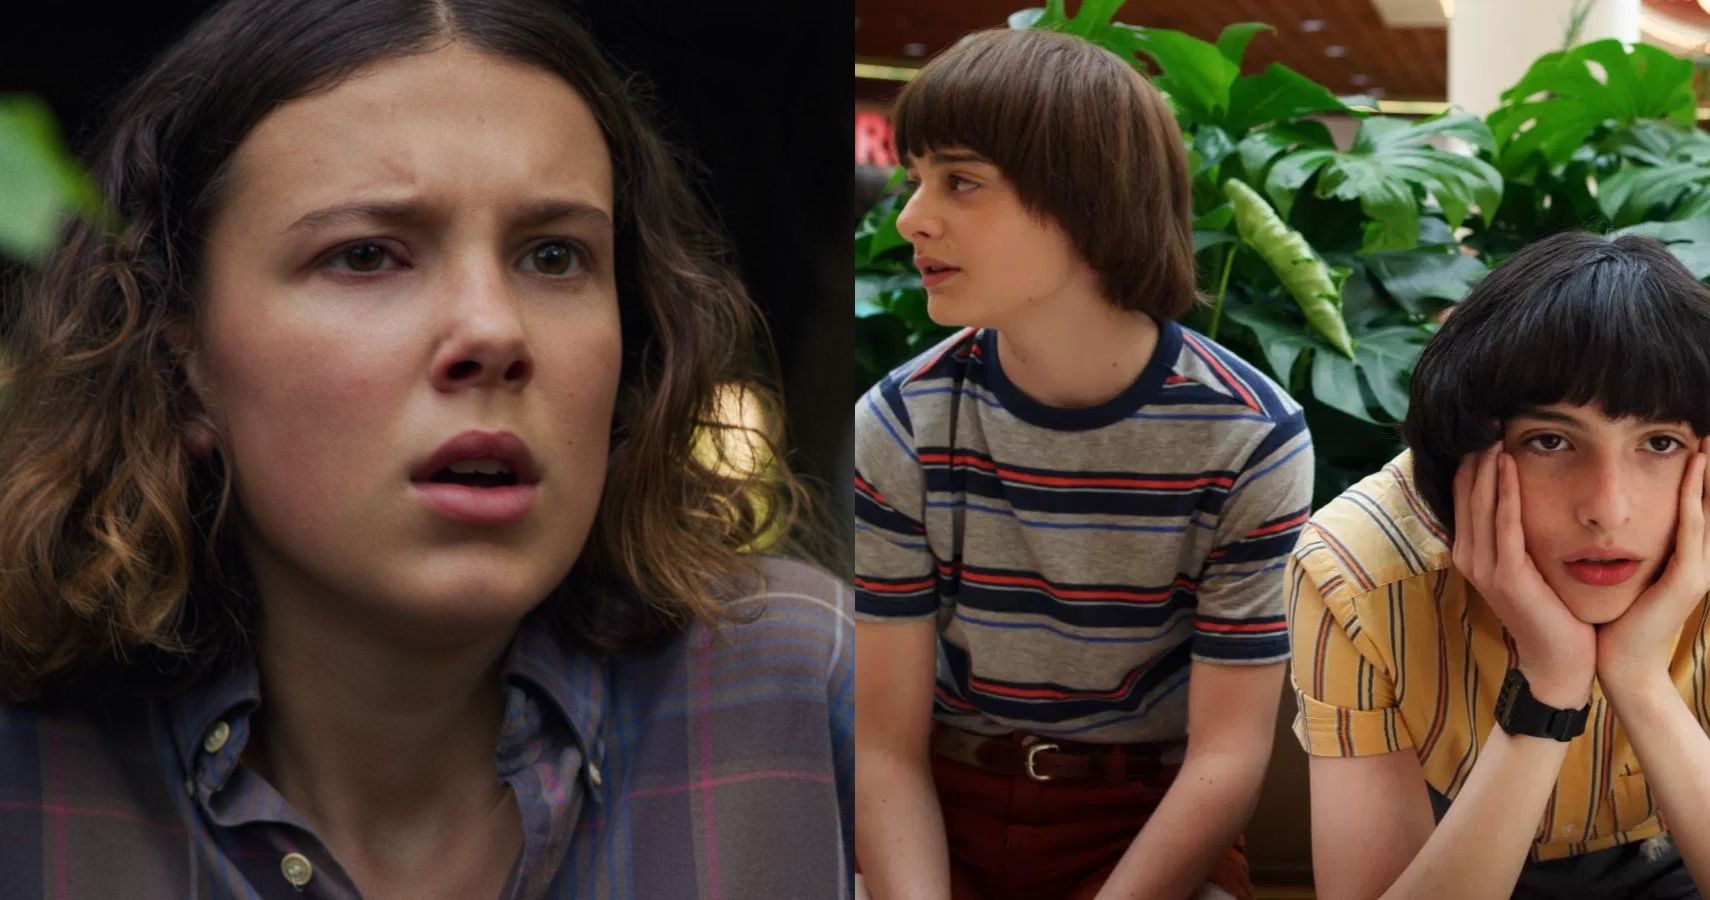 Stranger Things Season 4 Questions That Need Answers in Season 5